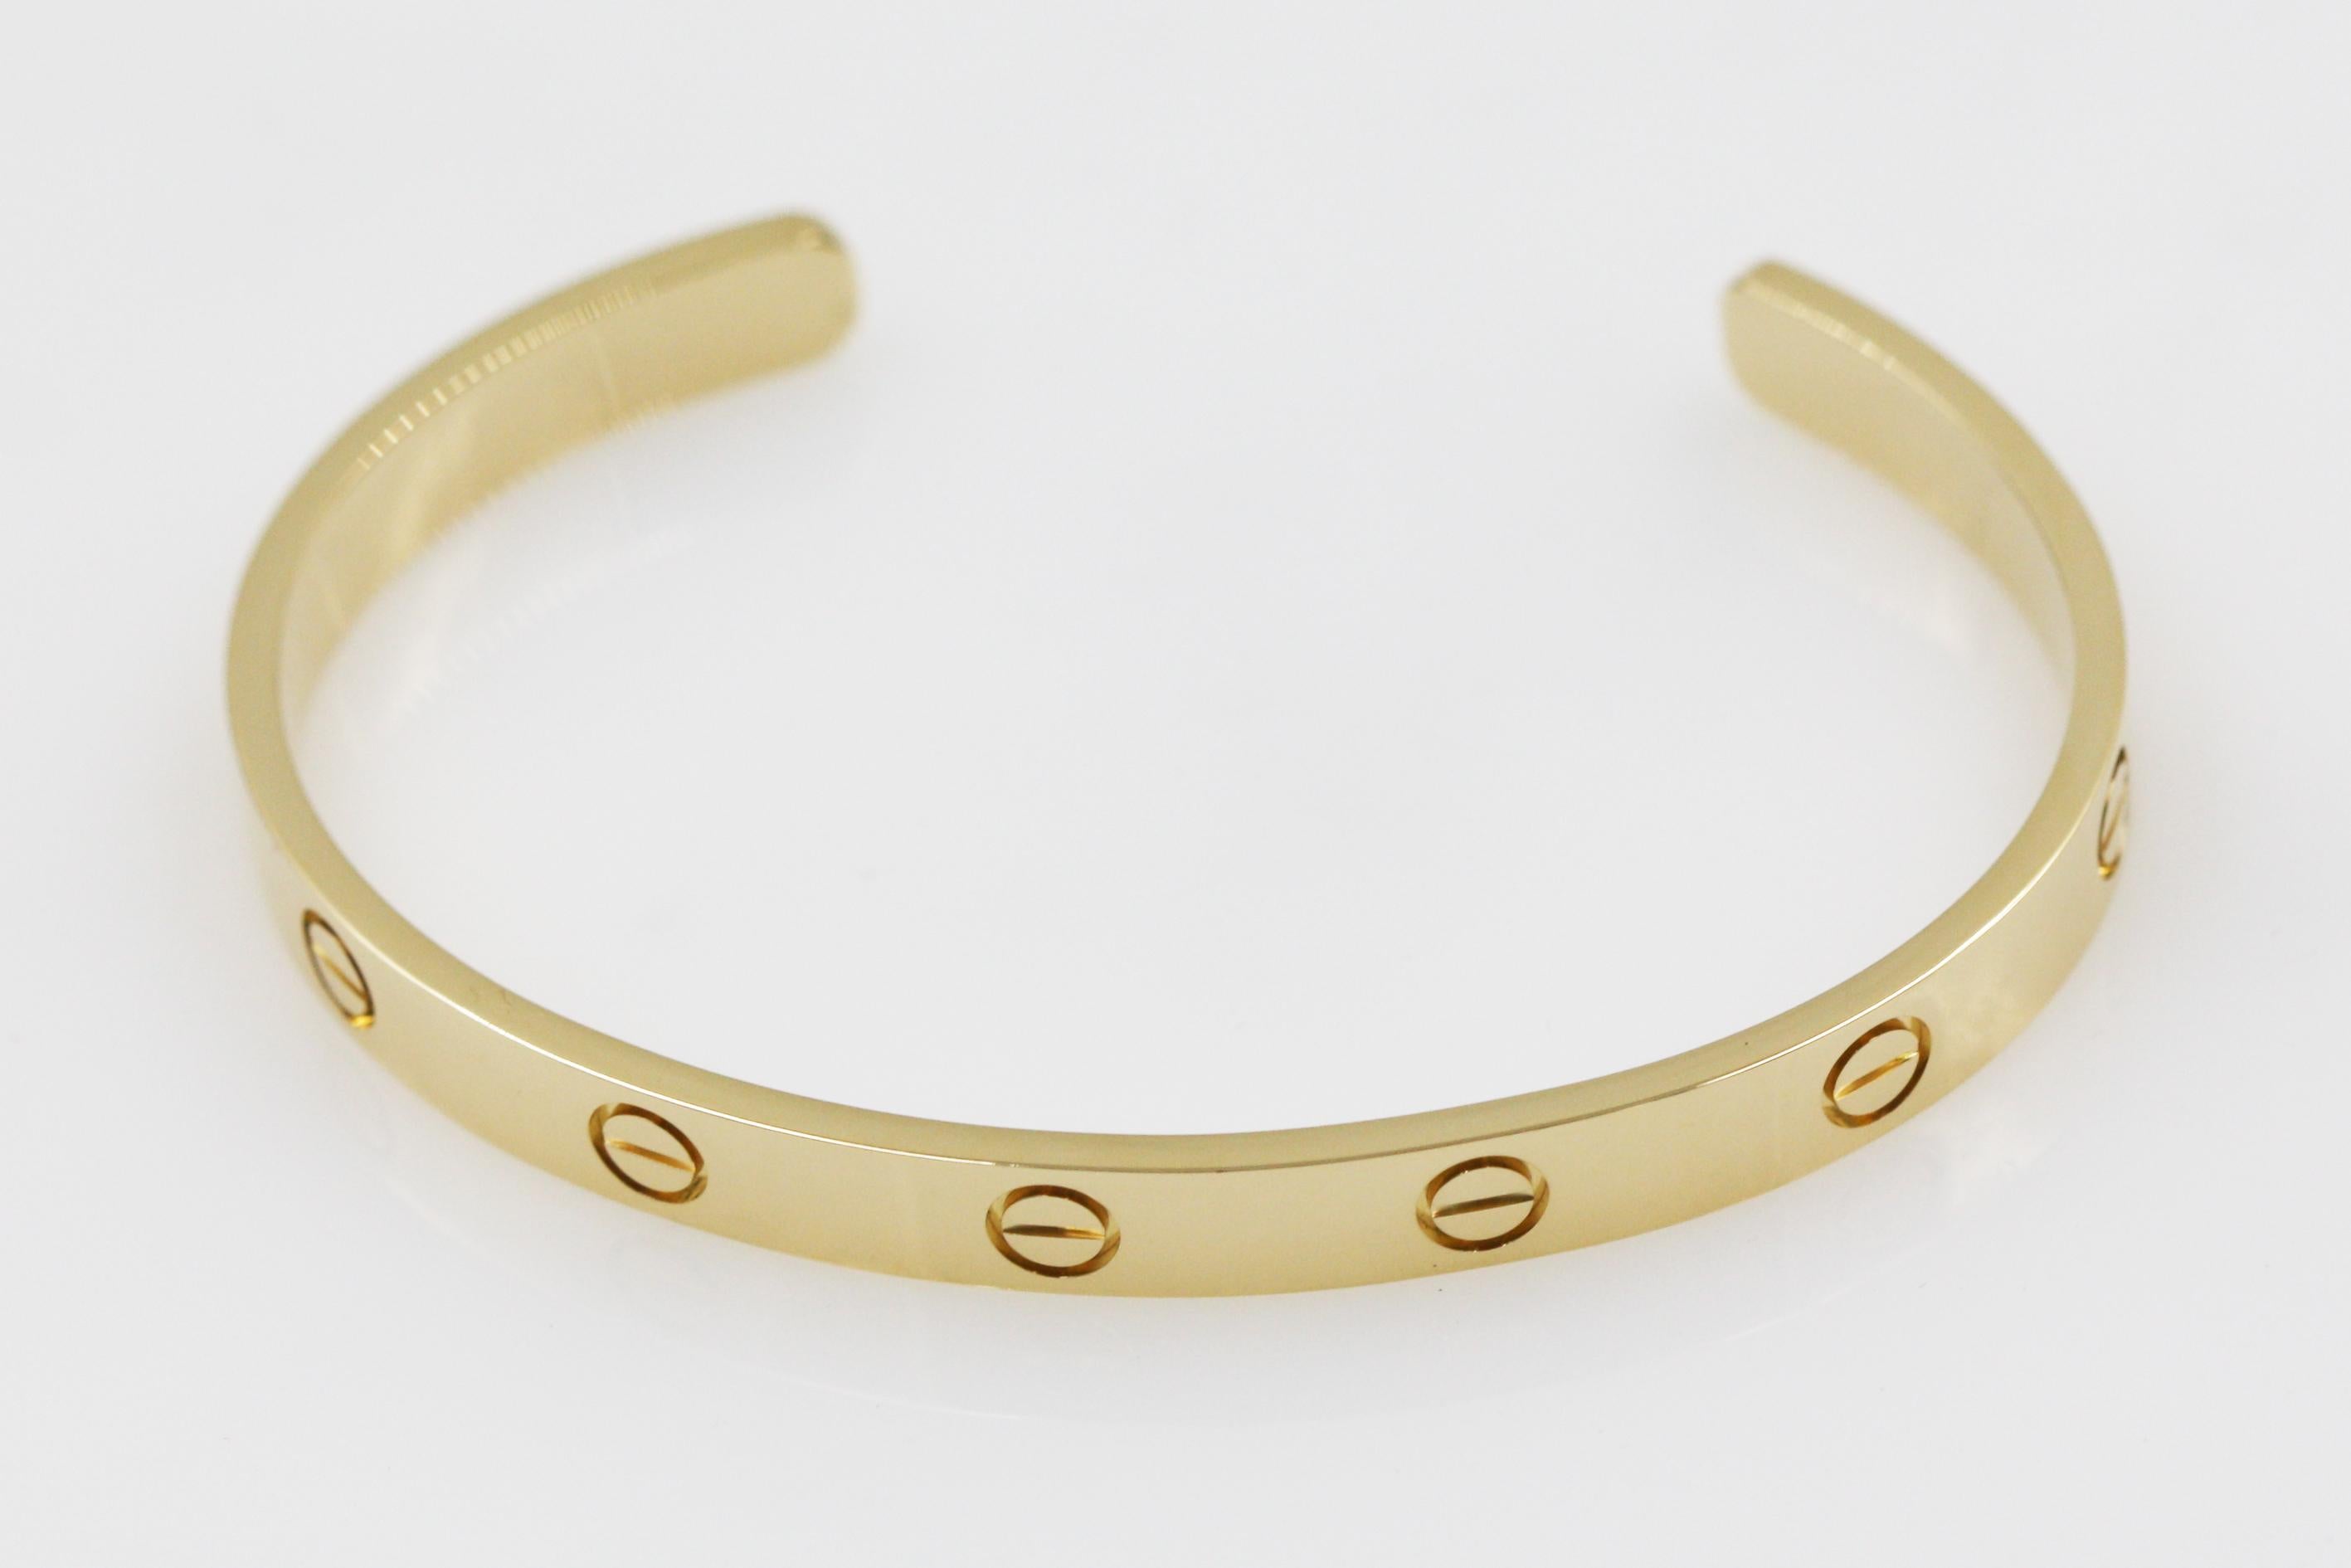 A beautiful cuff bracelet from Cartier Love collection, made in 18K yellow gold. The bracelet have the iconic screw motif.

Size: 17
We have other size available, please feel free to ask.

Item comes with an original box and certificate.